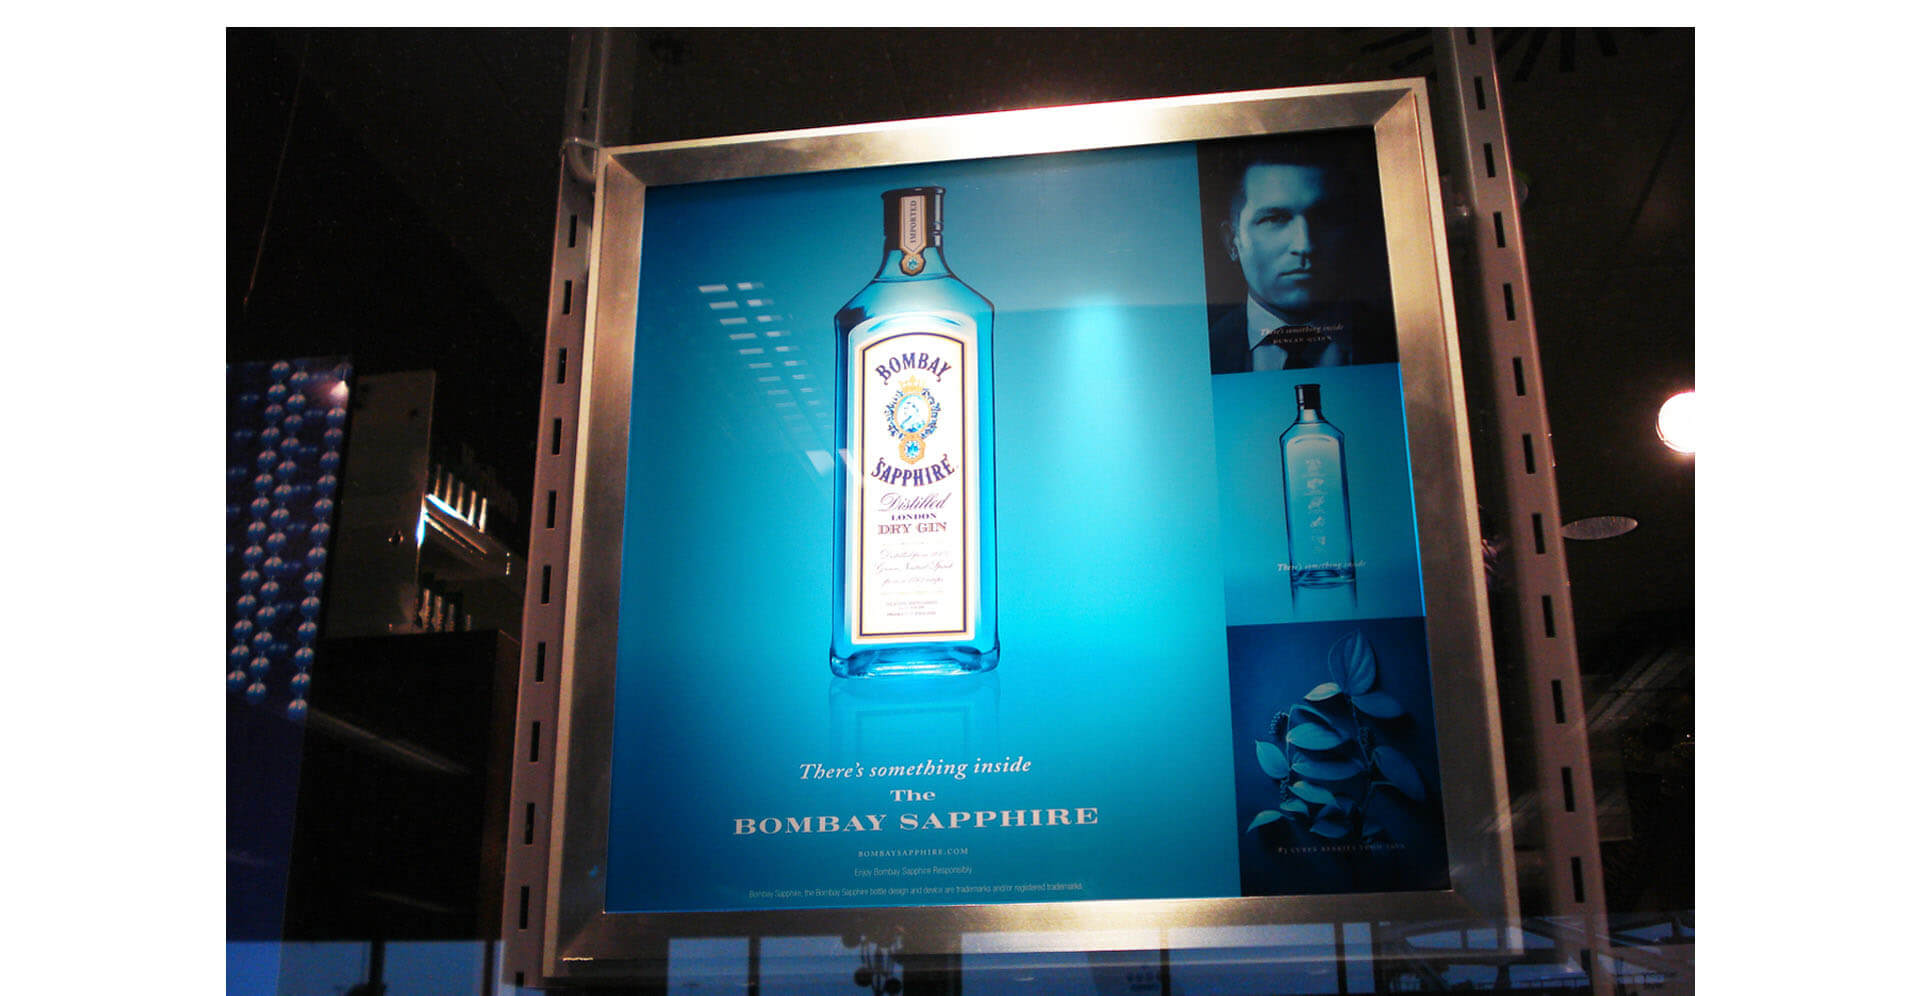  Bombay Sapphire Reign brand identity with Duncan Quinn and New York-based tabla protégé, Suphala promotion campaigns travel retailin airports